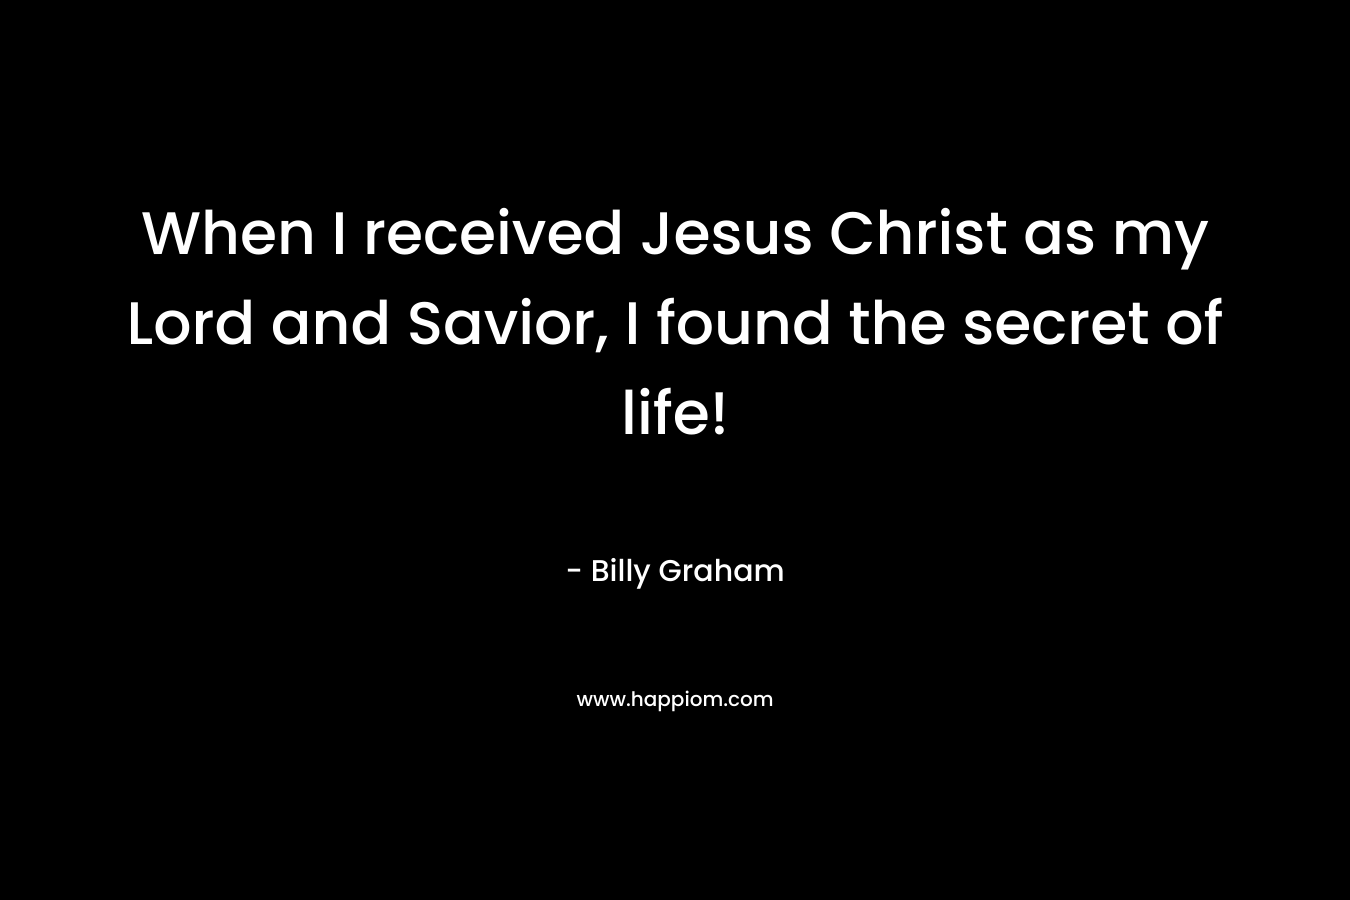 When I received Jesus Christ as my Lord and Savior, I found the secret of life!